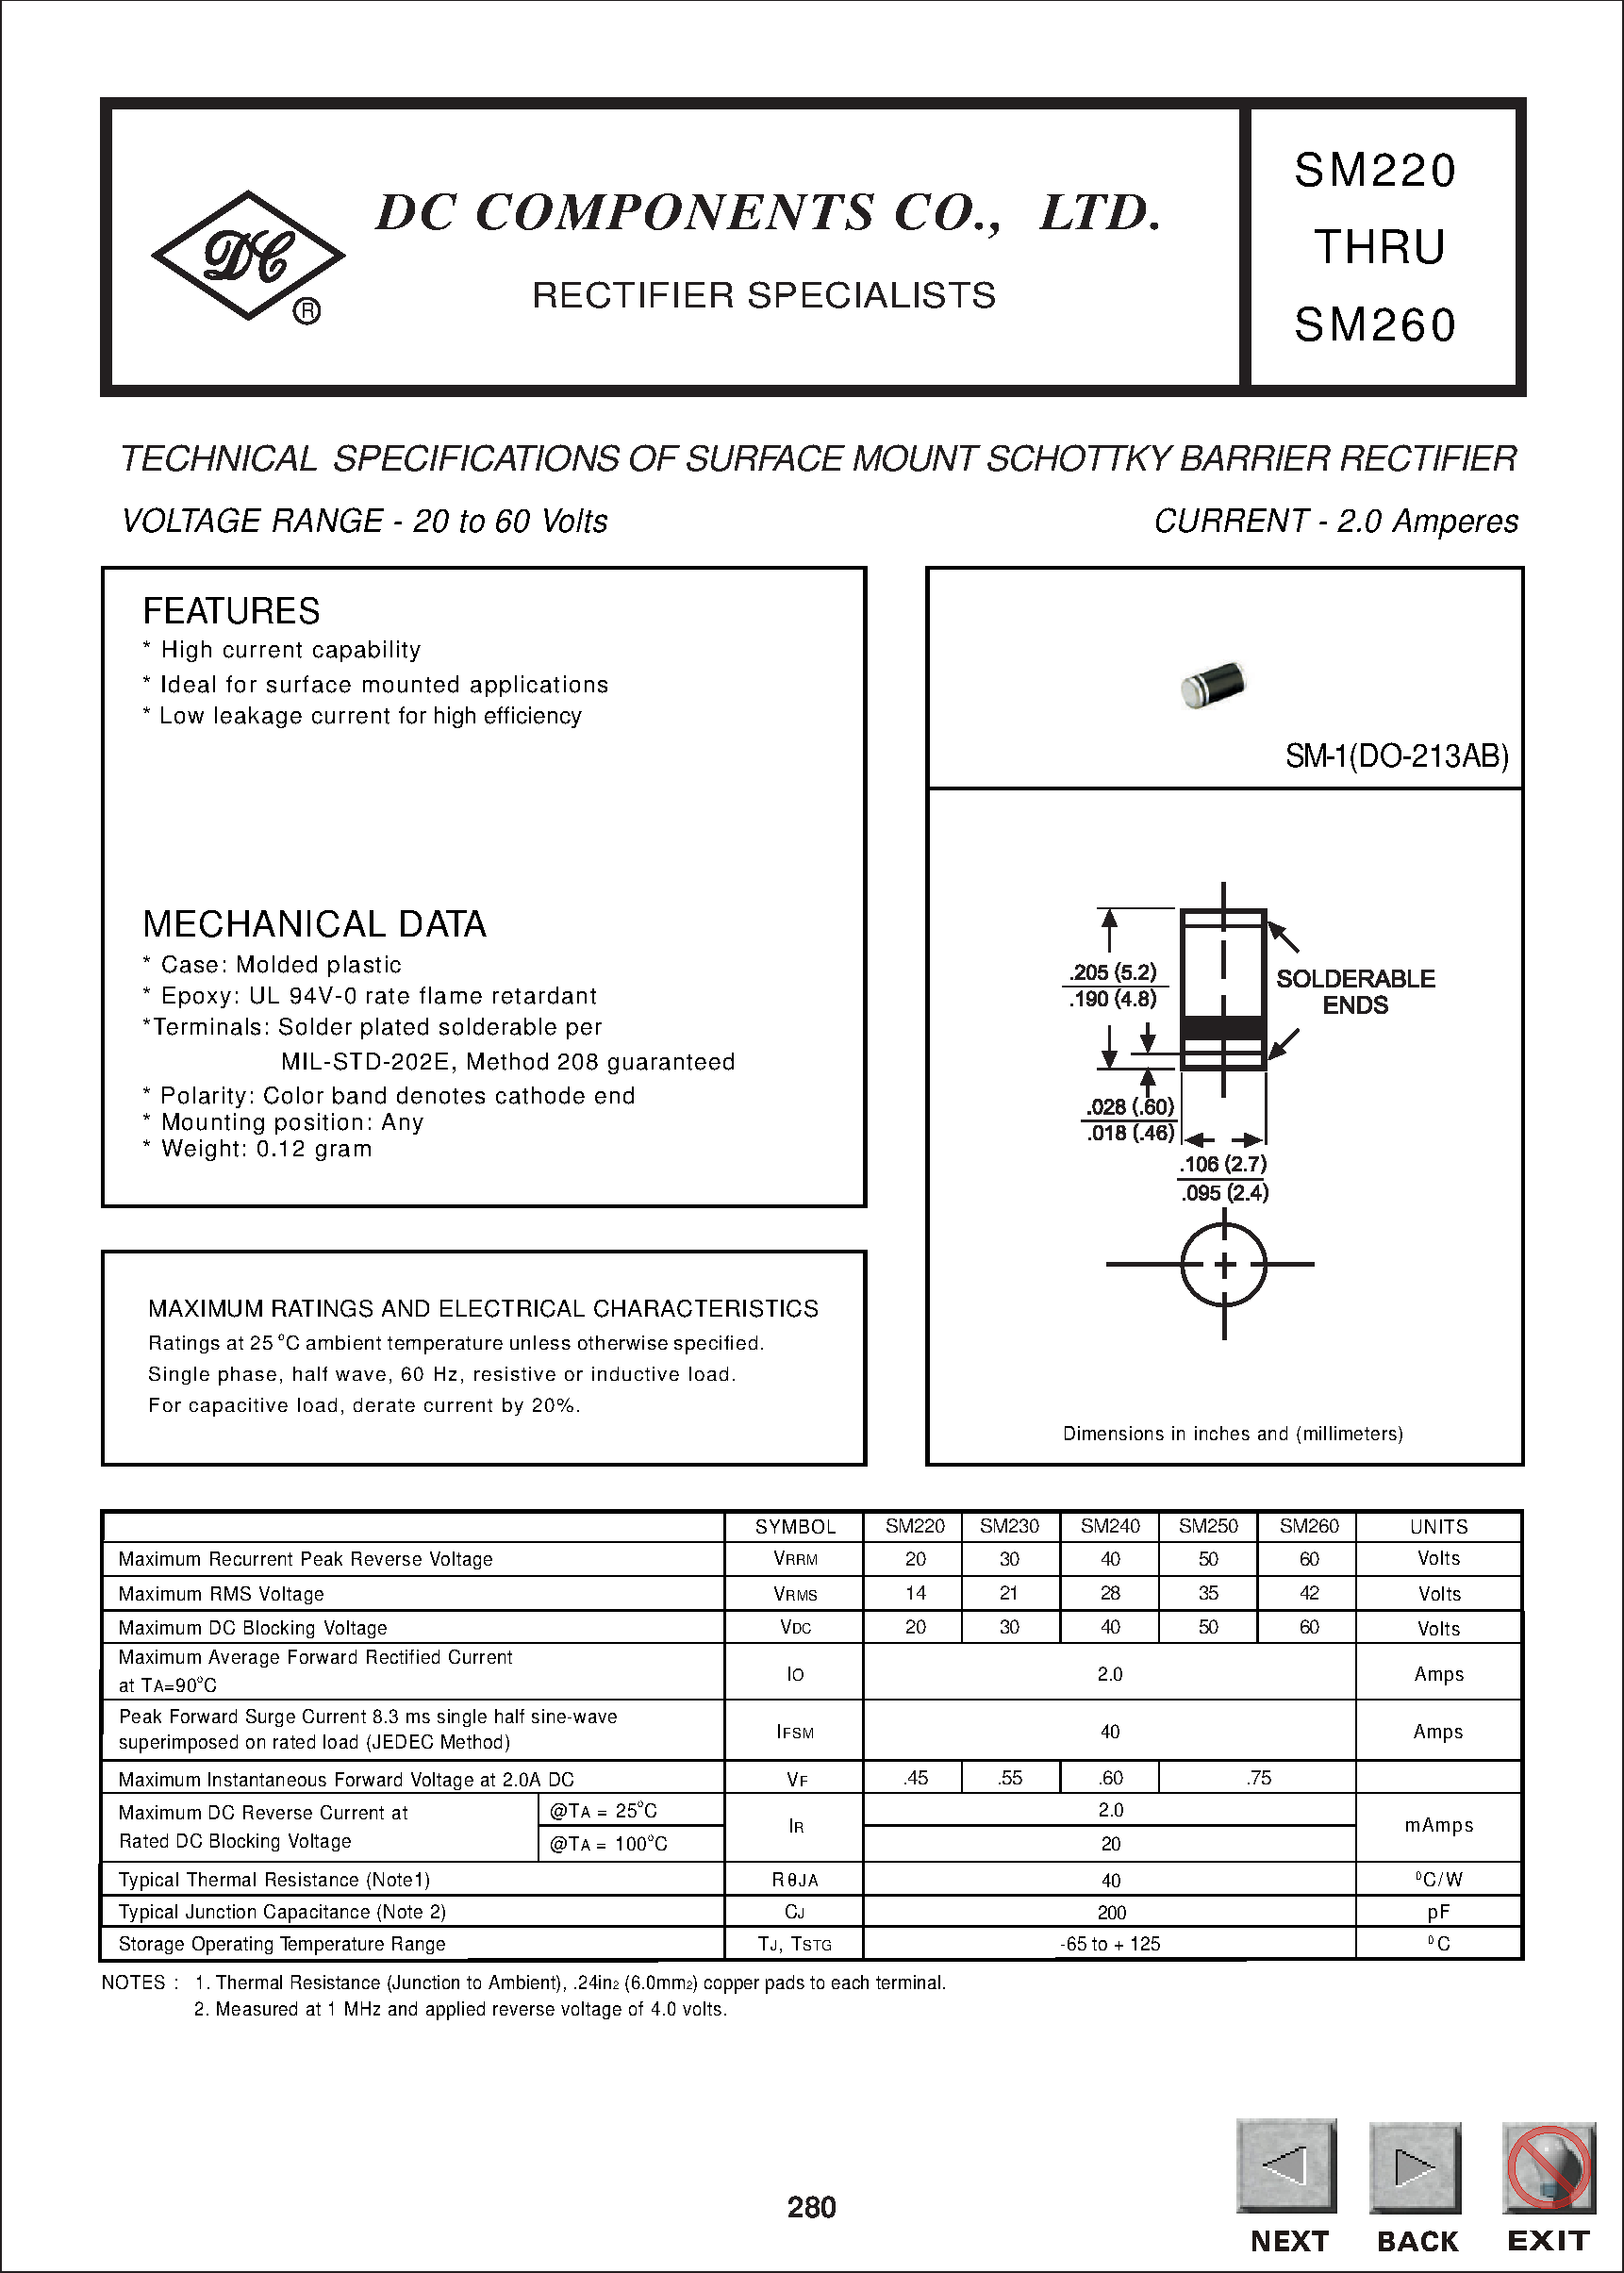 Даташит SM220 - TECHNICAL SPECIFICATIONS OF SURFACE MOUNT SCHOTTKY BARRIER RECTIFIER страница 1